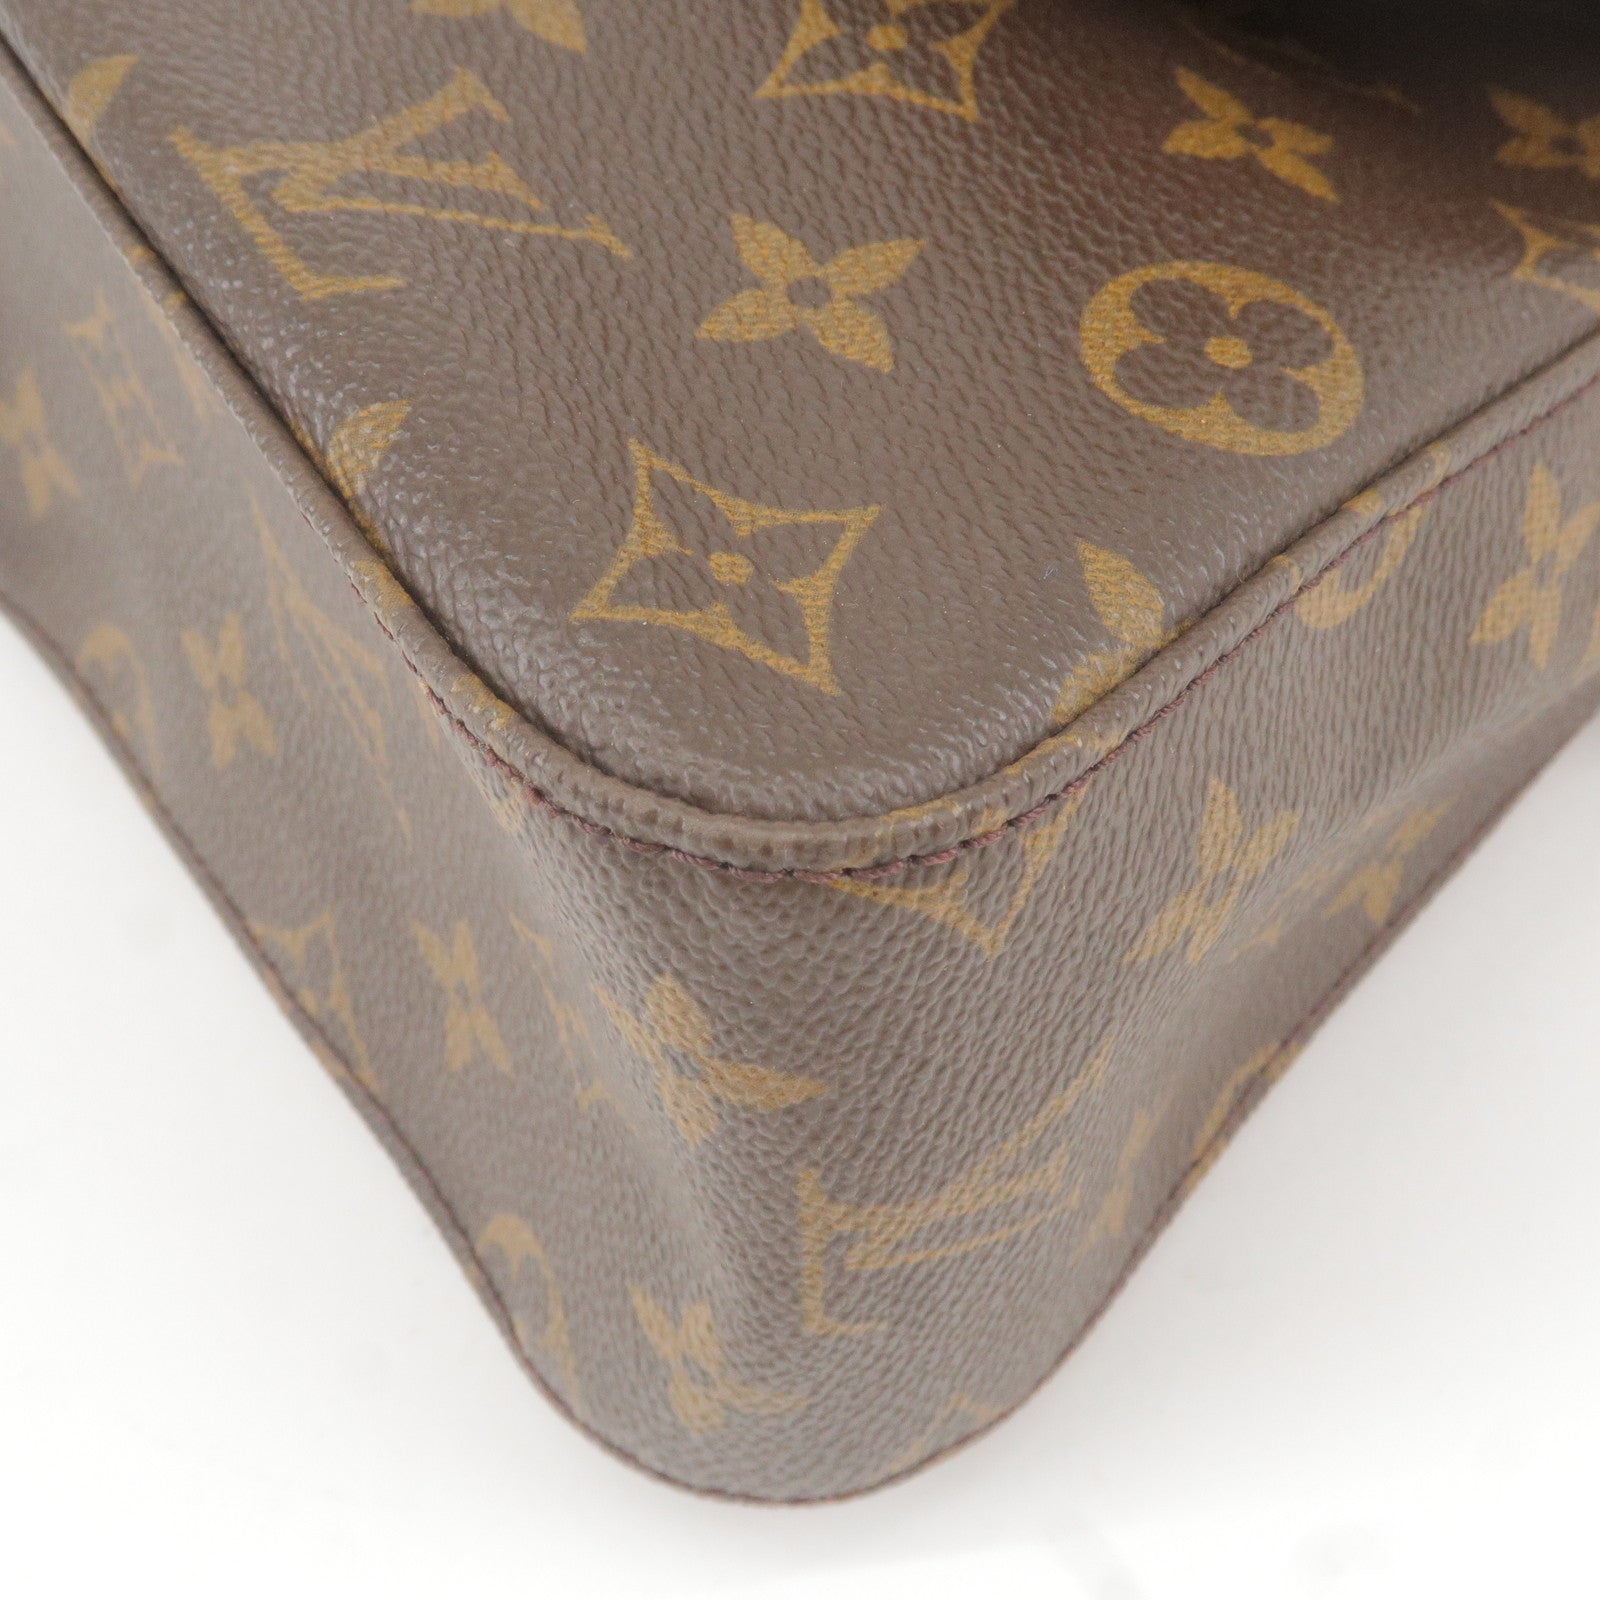 Louis Vuitton pre-owned Limited Edition Debossed Monogram Keepall Travel Bag  - Farfetch